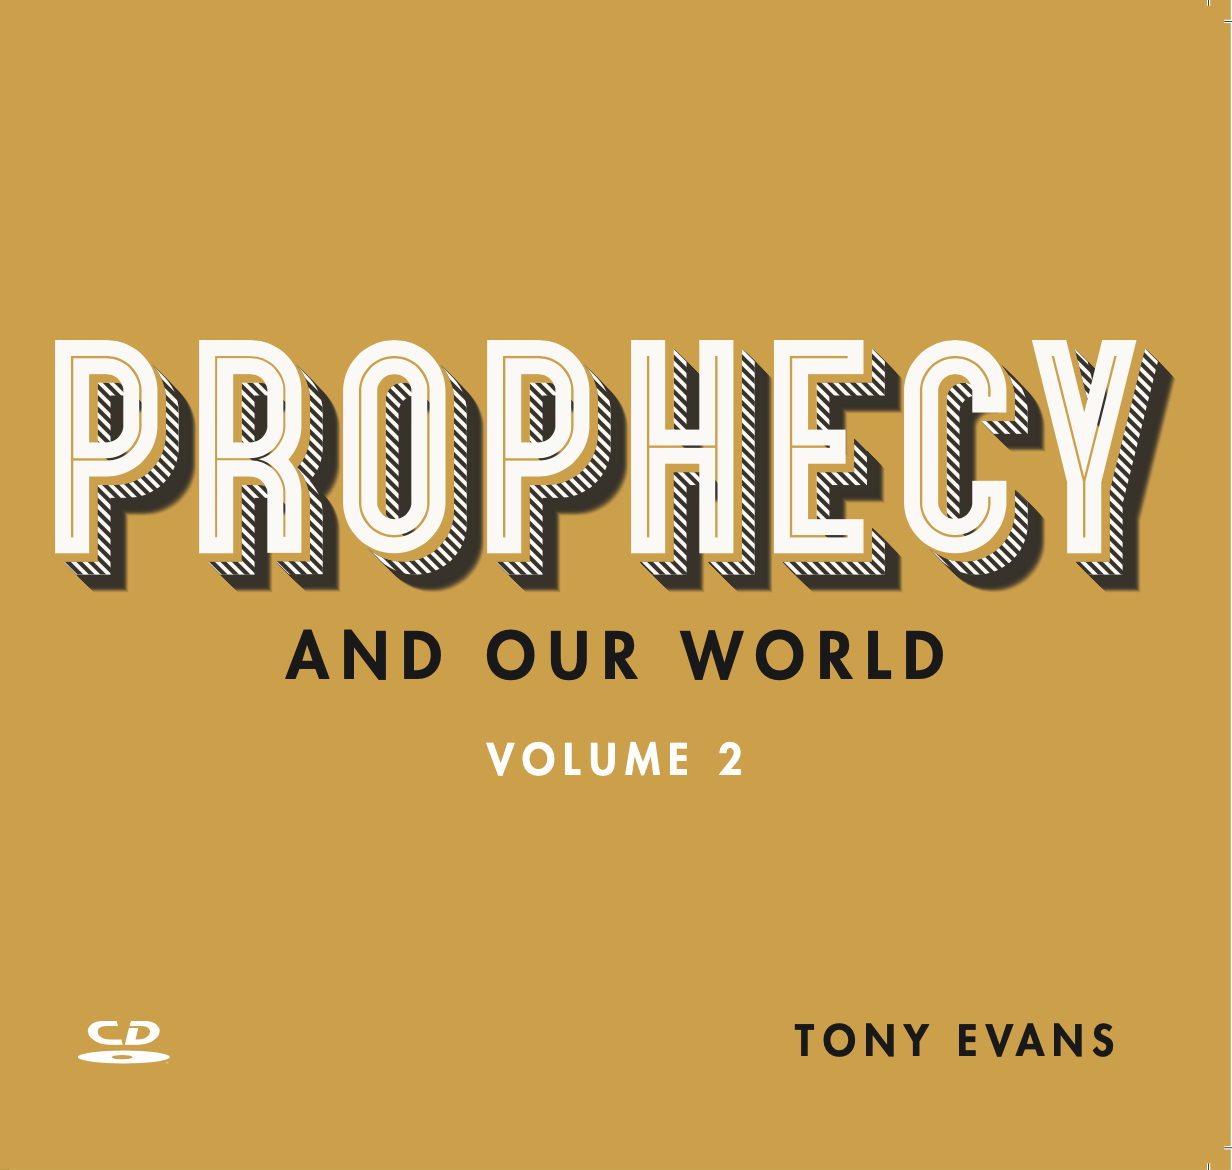 Prophecy and Our World Vol 2 - DVD Series